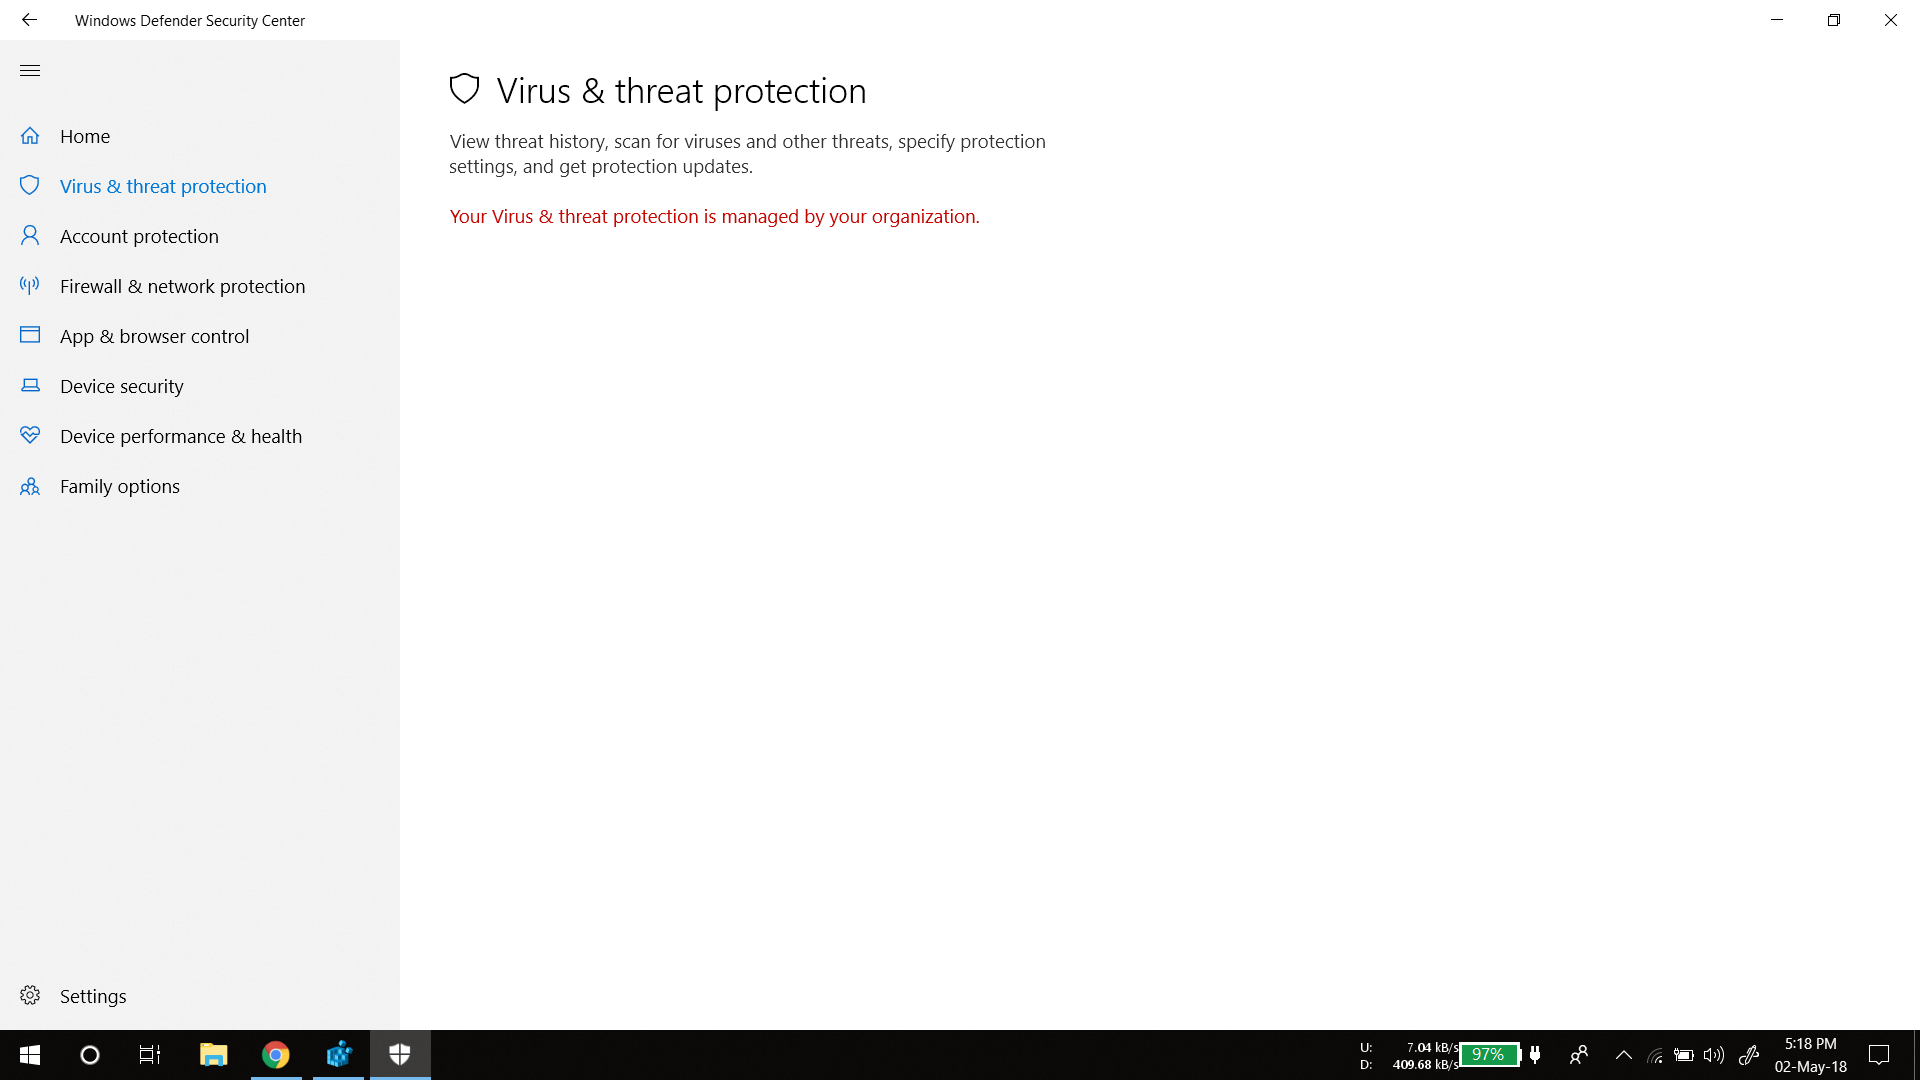 Windows defender: "Your Virus & threat protection is managed by your organization" 6408d6ee-1c20-4c97-bf4e-3622cf2cee50?upload=true.png